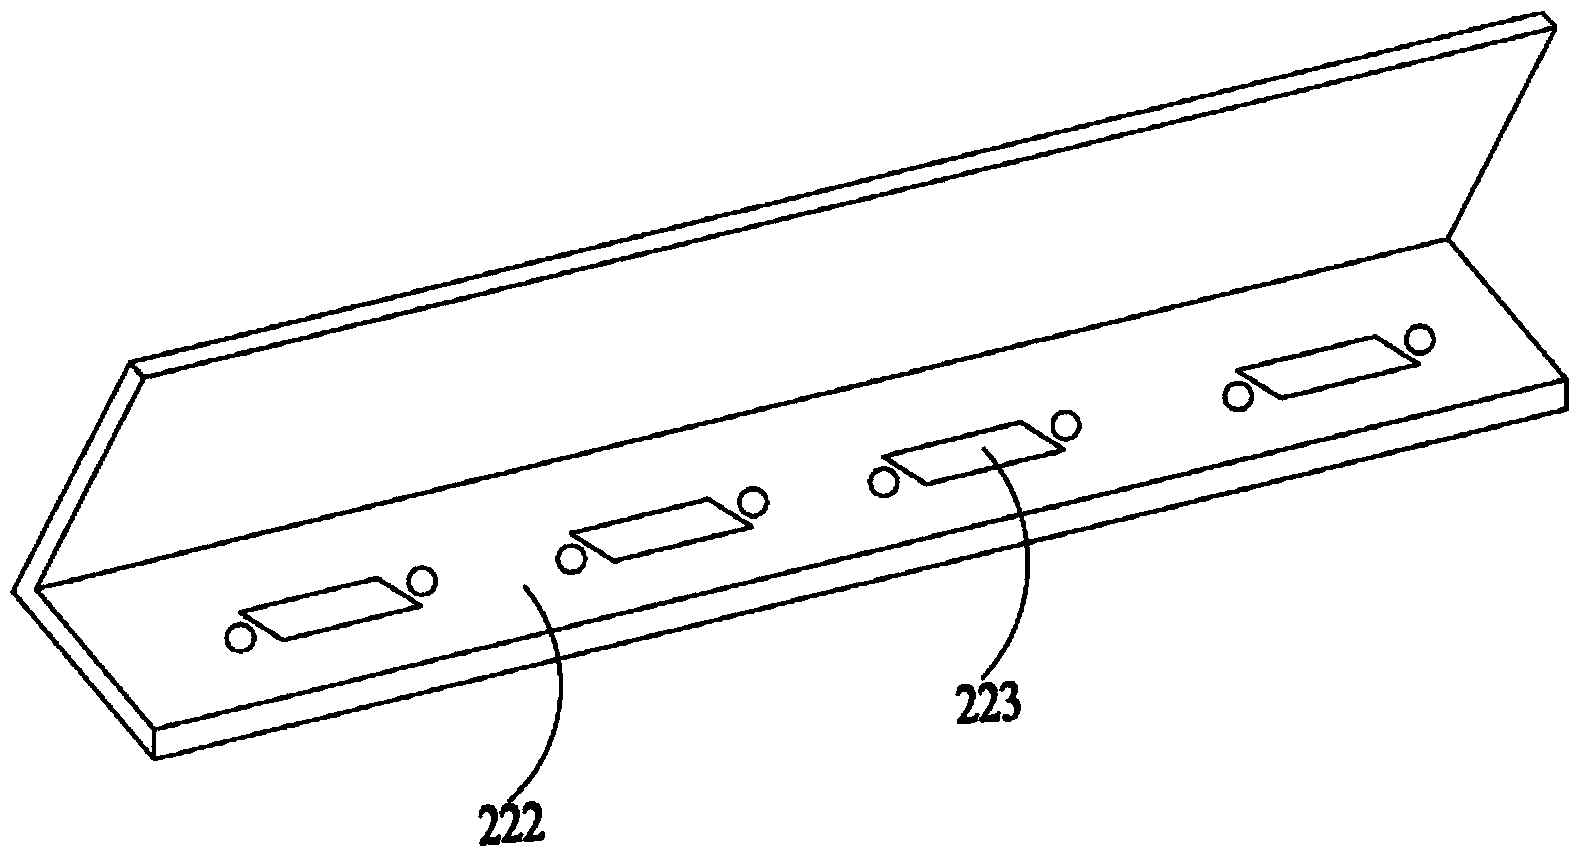 Advertising lamp box disassembly and assembly method